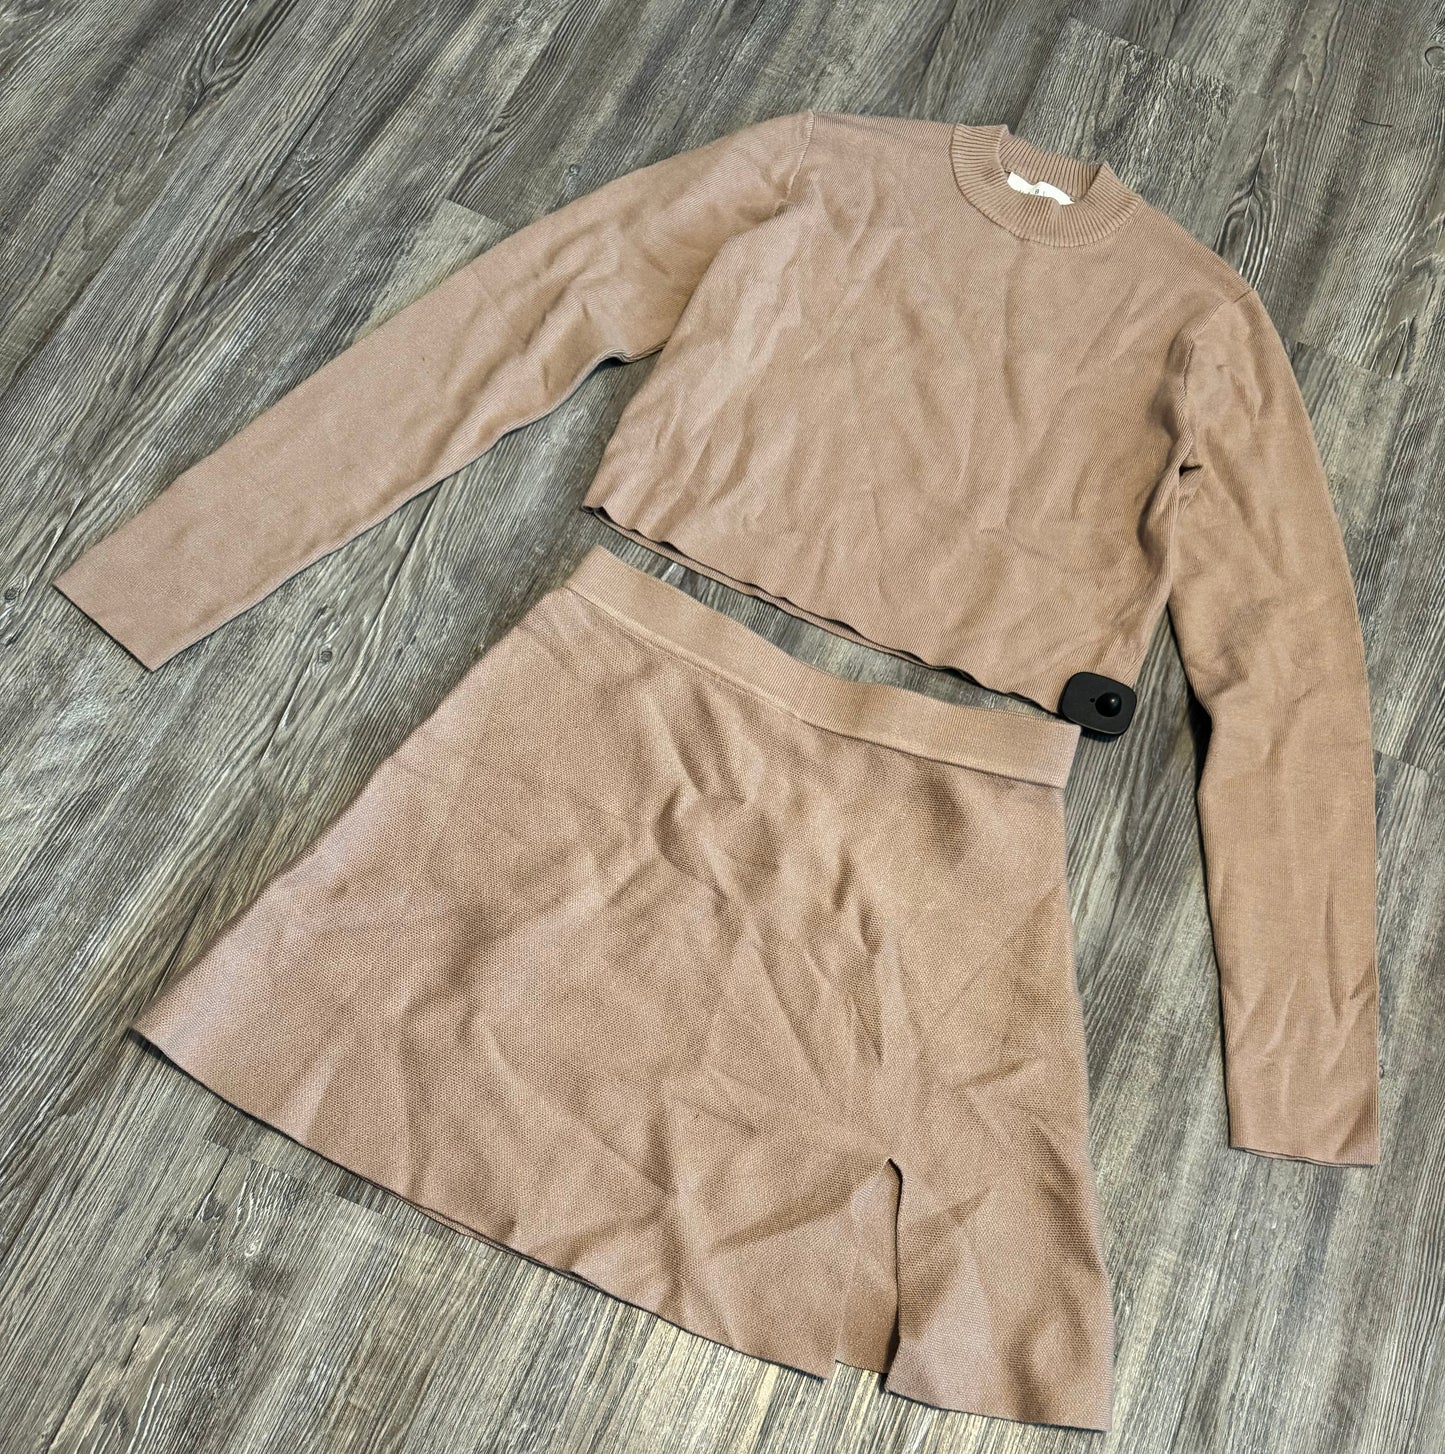 Top 2pc Long Sleeve By Clothes Mentor  Size: L